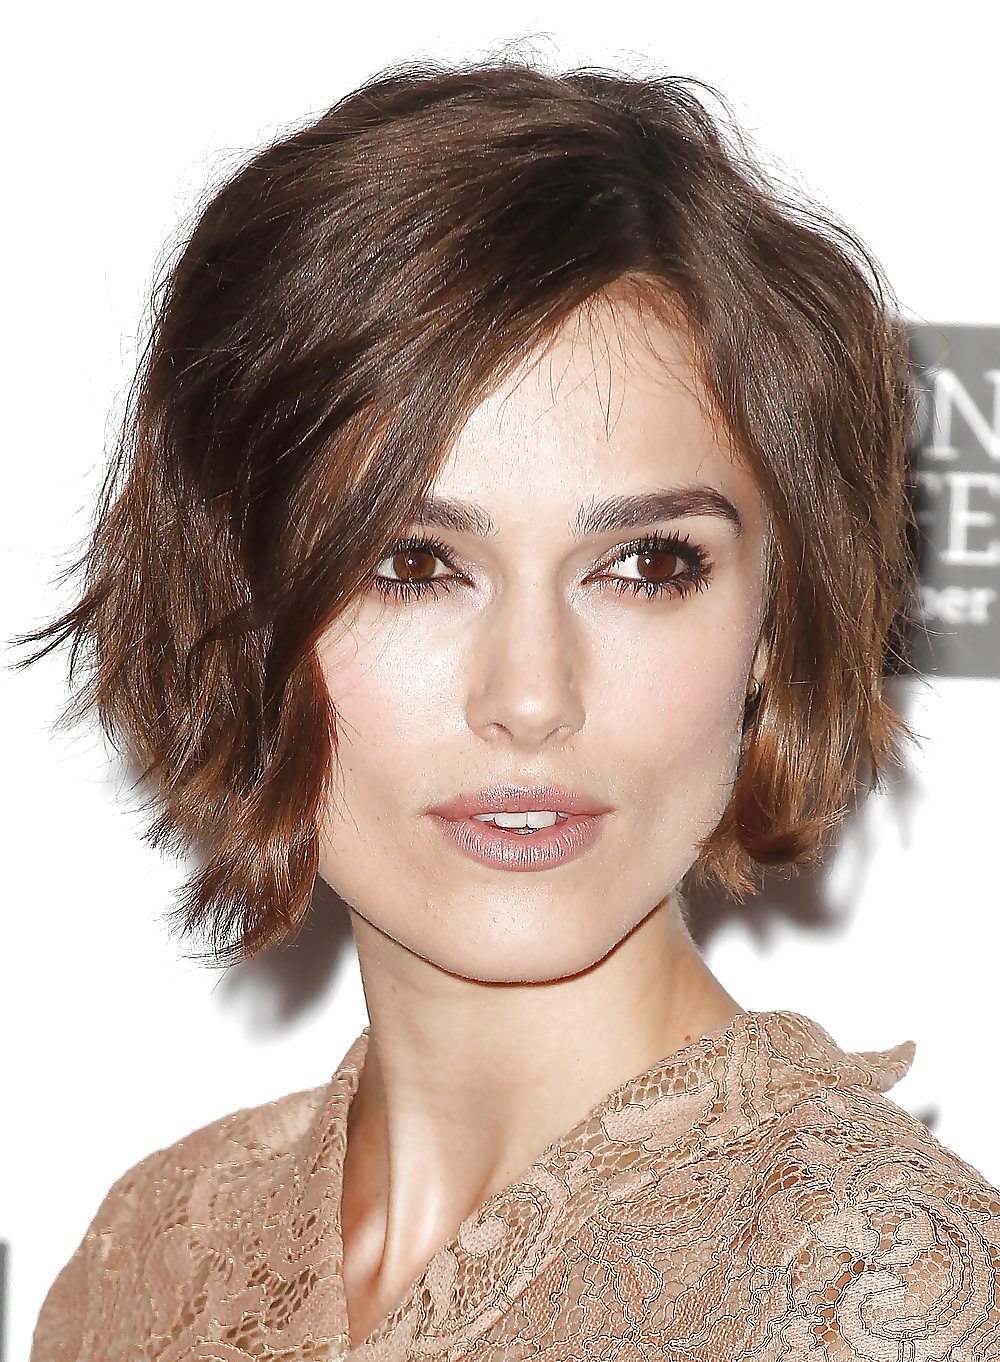 Keira Knightley The Royal Lady of England #35650170